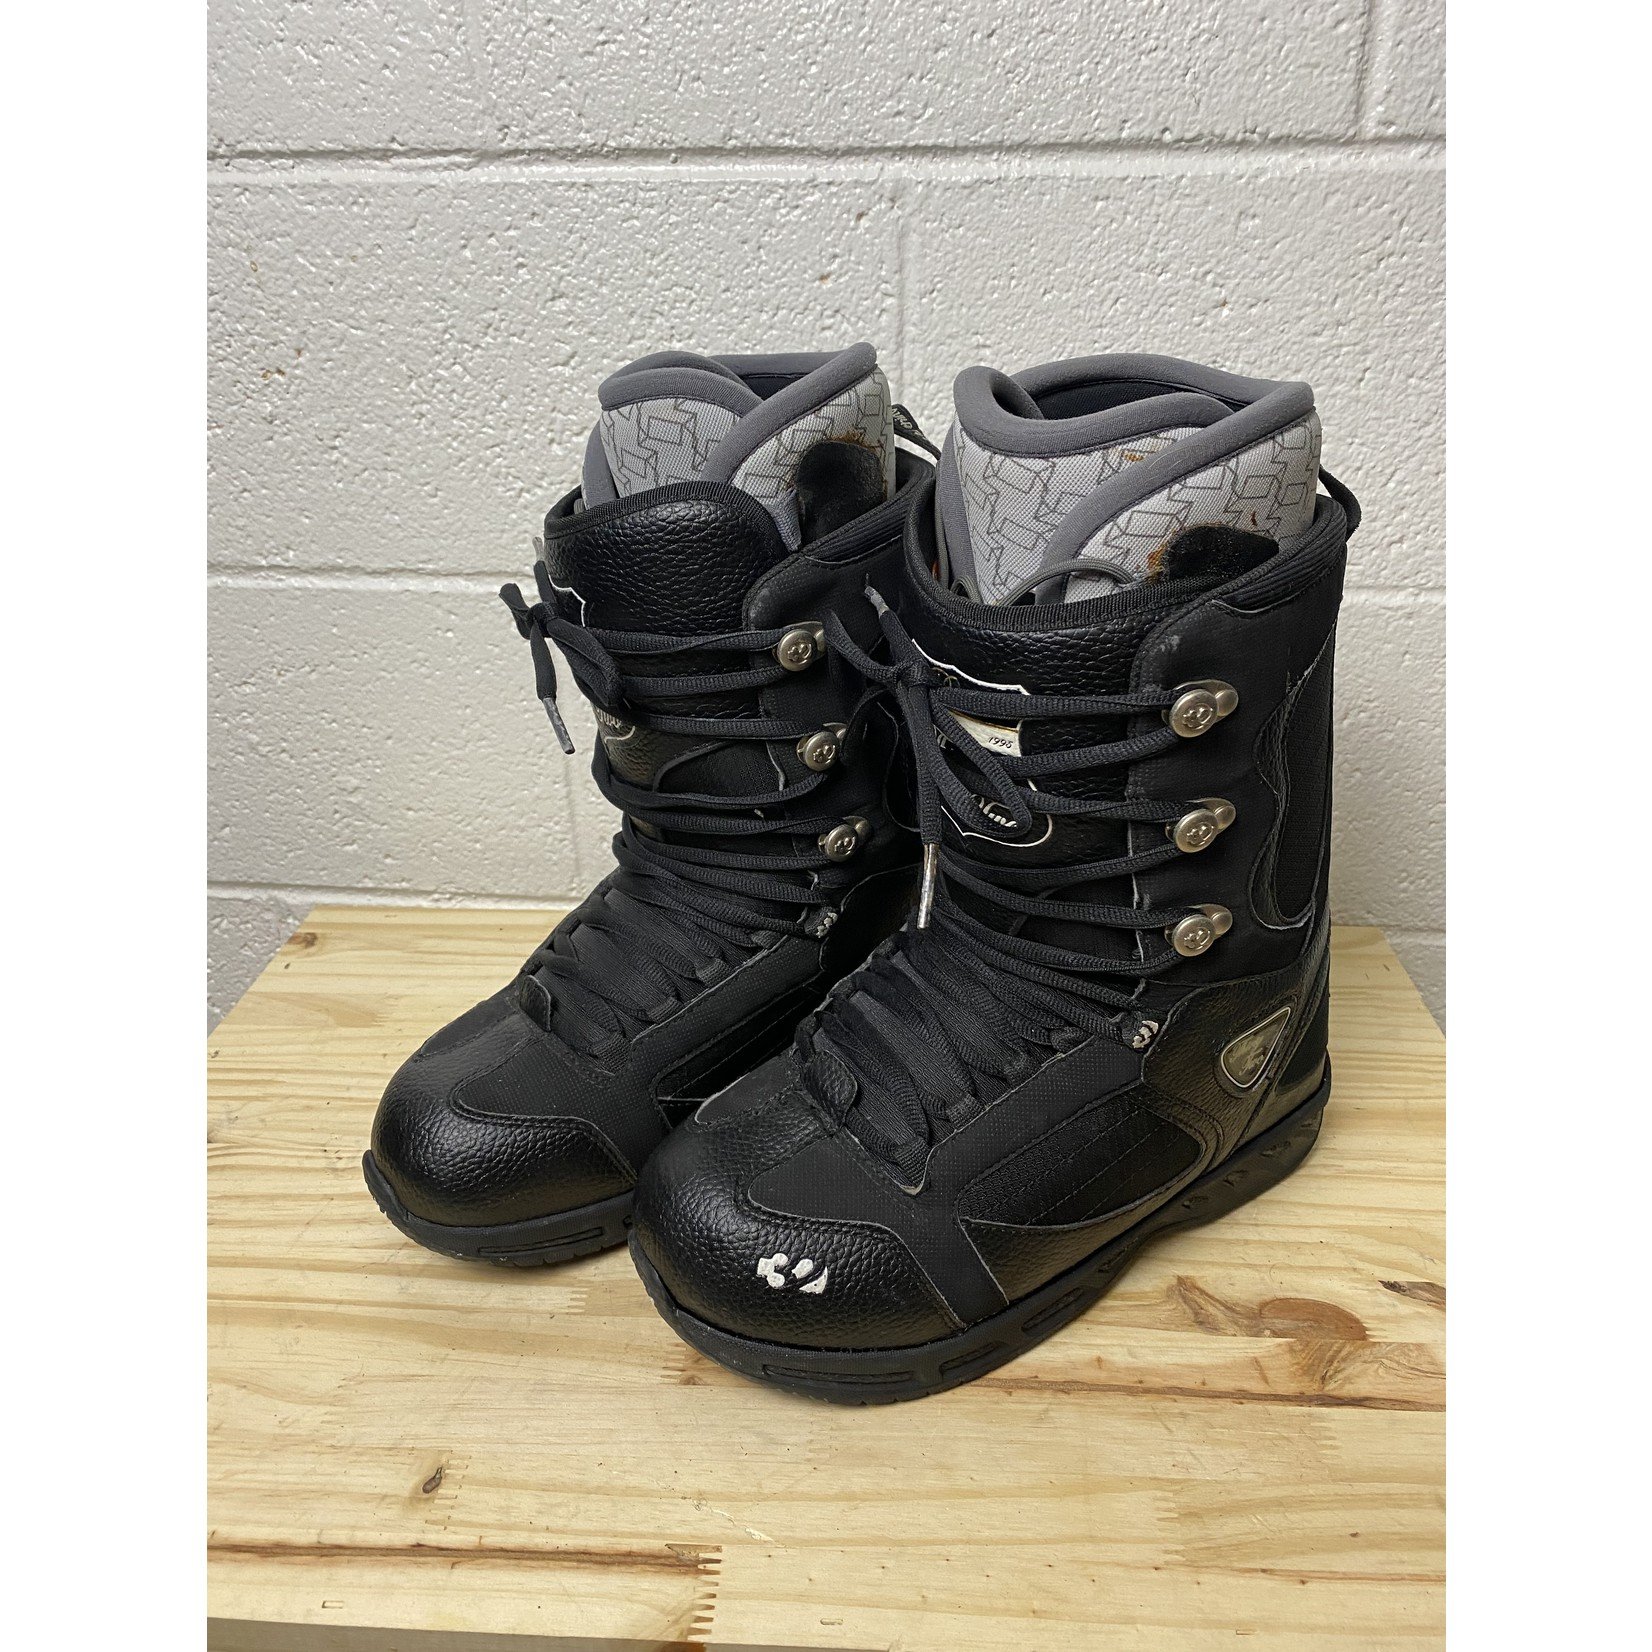 ThirtyTwo ThirtyTwo Prion Lace Snowboard Boots